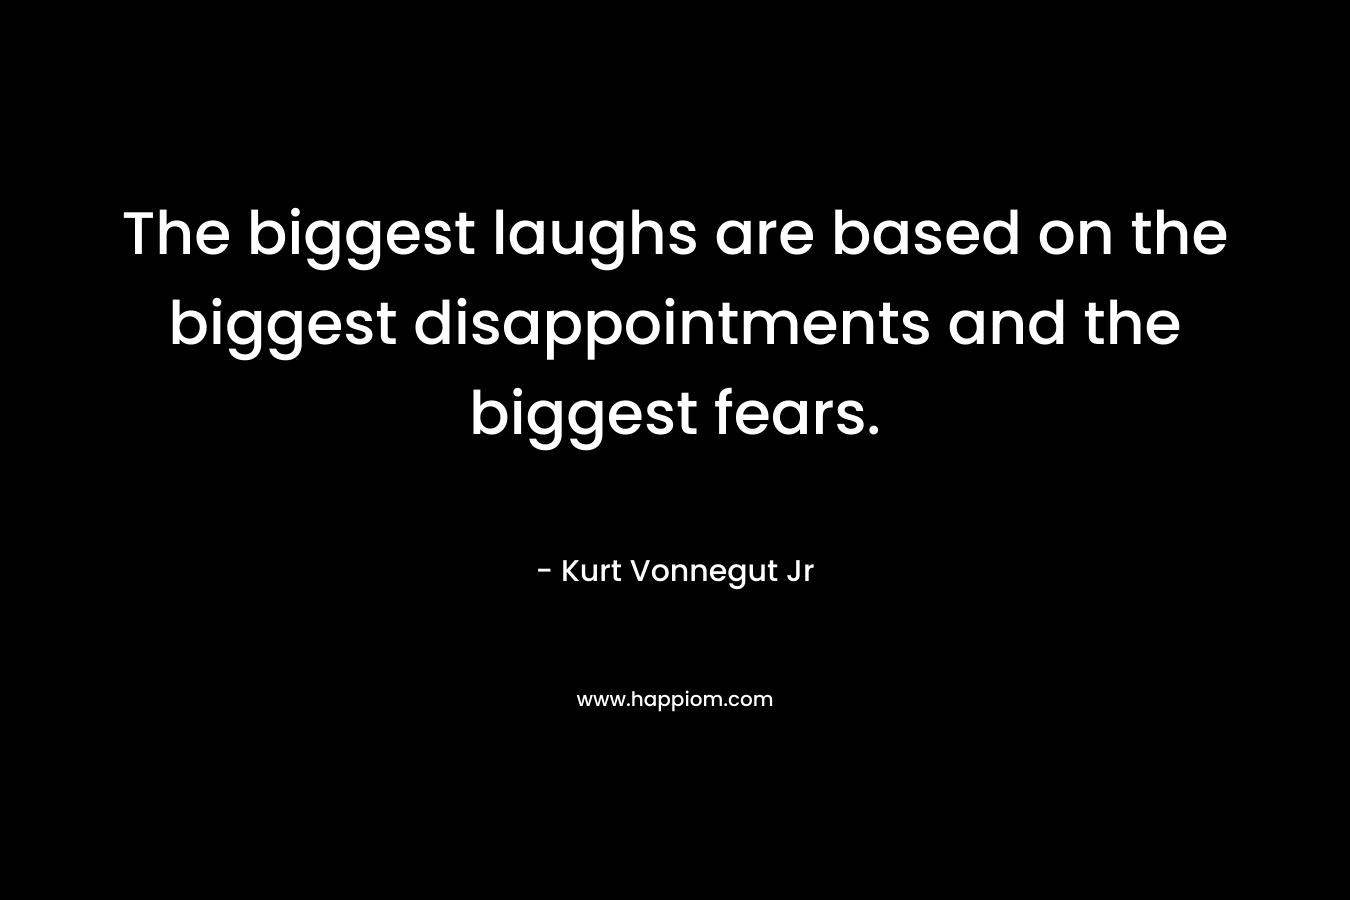 The biggest laughs are based on the biggest disappointments and the biggest fears. – Kurt Vonnegut Jr